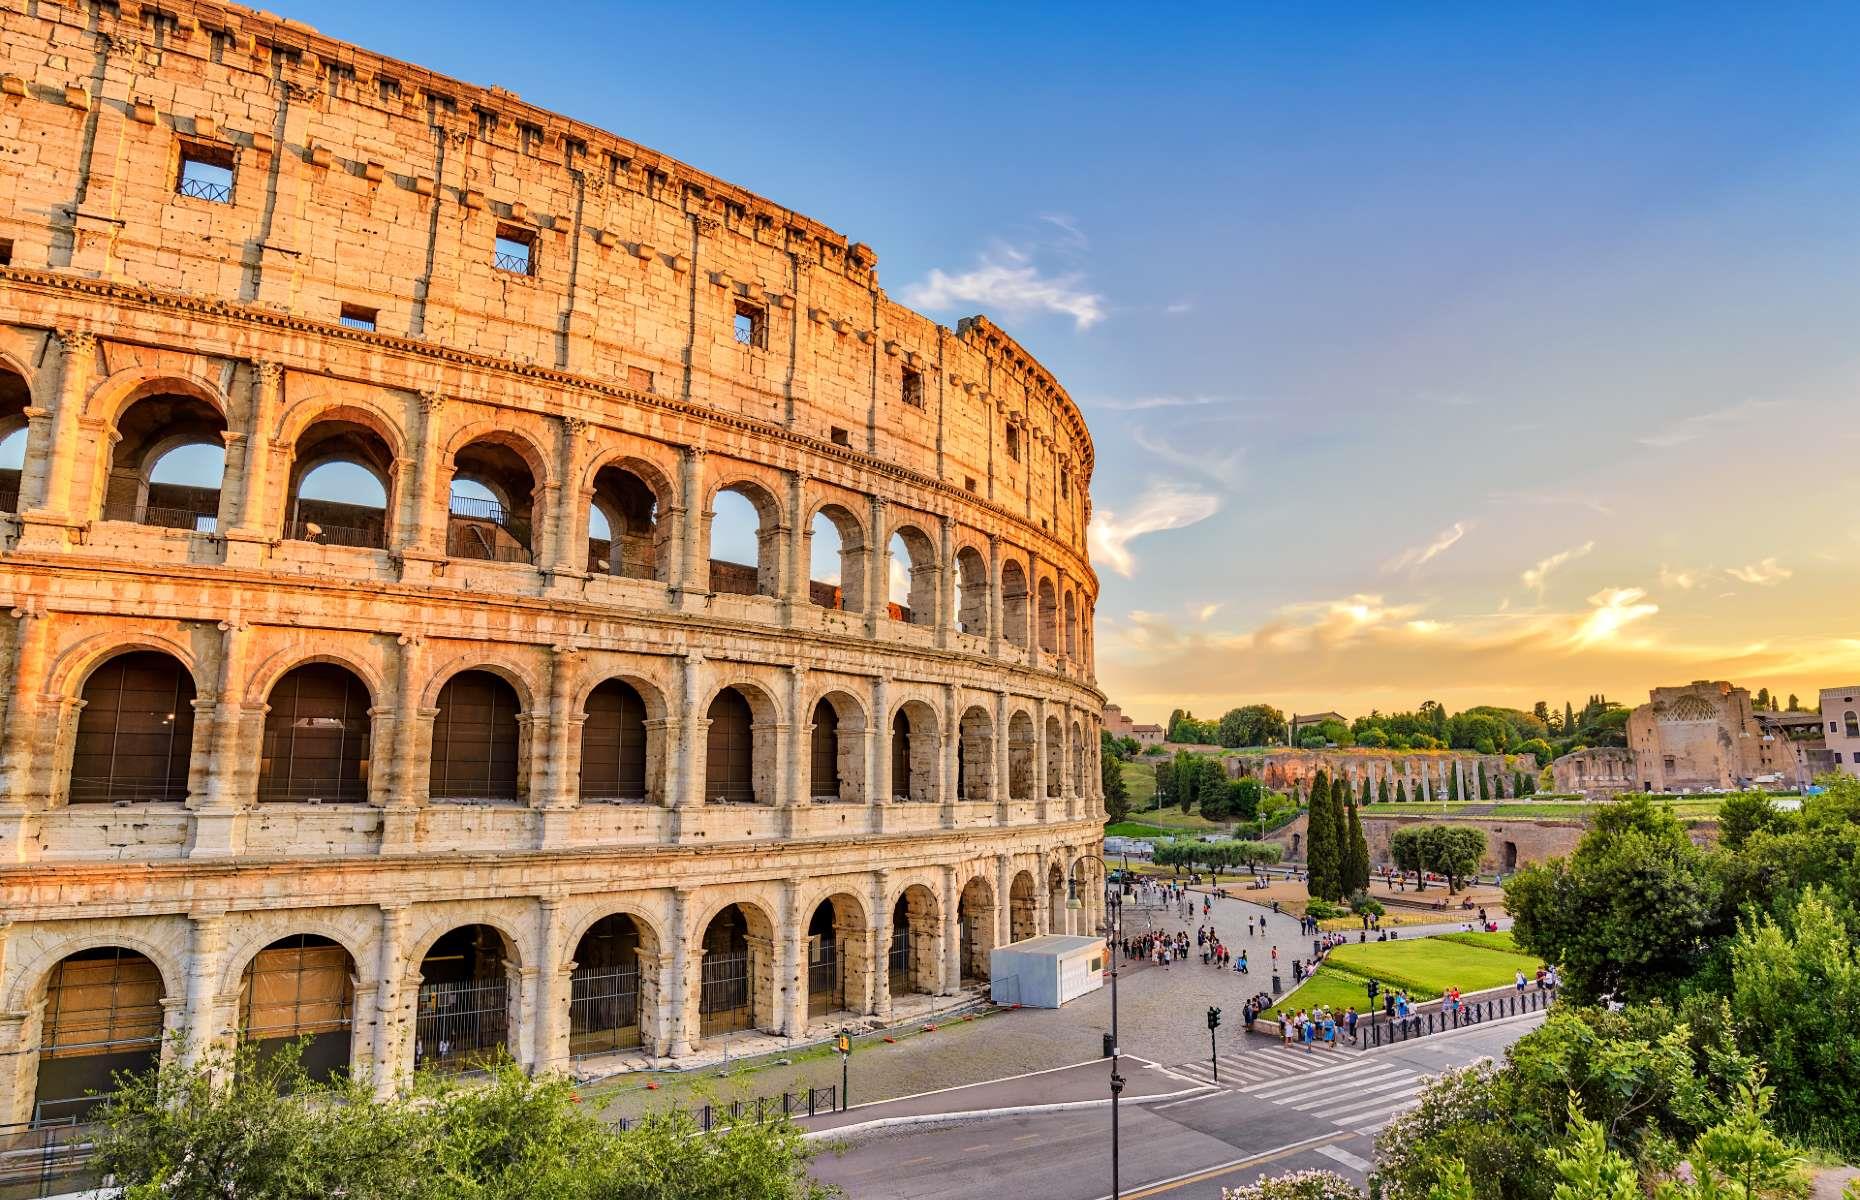 <p>Arguably the most famous Roman ruin in the world, the Colosseum is the largest amphitheater ever built. It took around eight years to construct and it was intended as a gift to the Roman people from emperor Vespasian, who ruled from AD 69 to 79. In its heyday, it could hold up to 80,000 spectators. Yet the Colosseum is also a reminder of the brutality of the Roman empire; it's thought that around 60,000 slaves participated in building the monumental structure, while an estimated 400,000 people died here either in executions or as gladiators.</p>  <p><a href="https://www.loveexploring.com/galleries/127724/30-amazing-sights-older-than-stonehenge?page=1"><strong>Check out the 30 sites which are actually older than Stonehenge</strong></a></p>